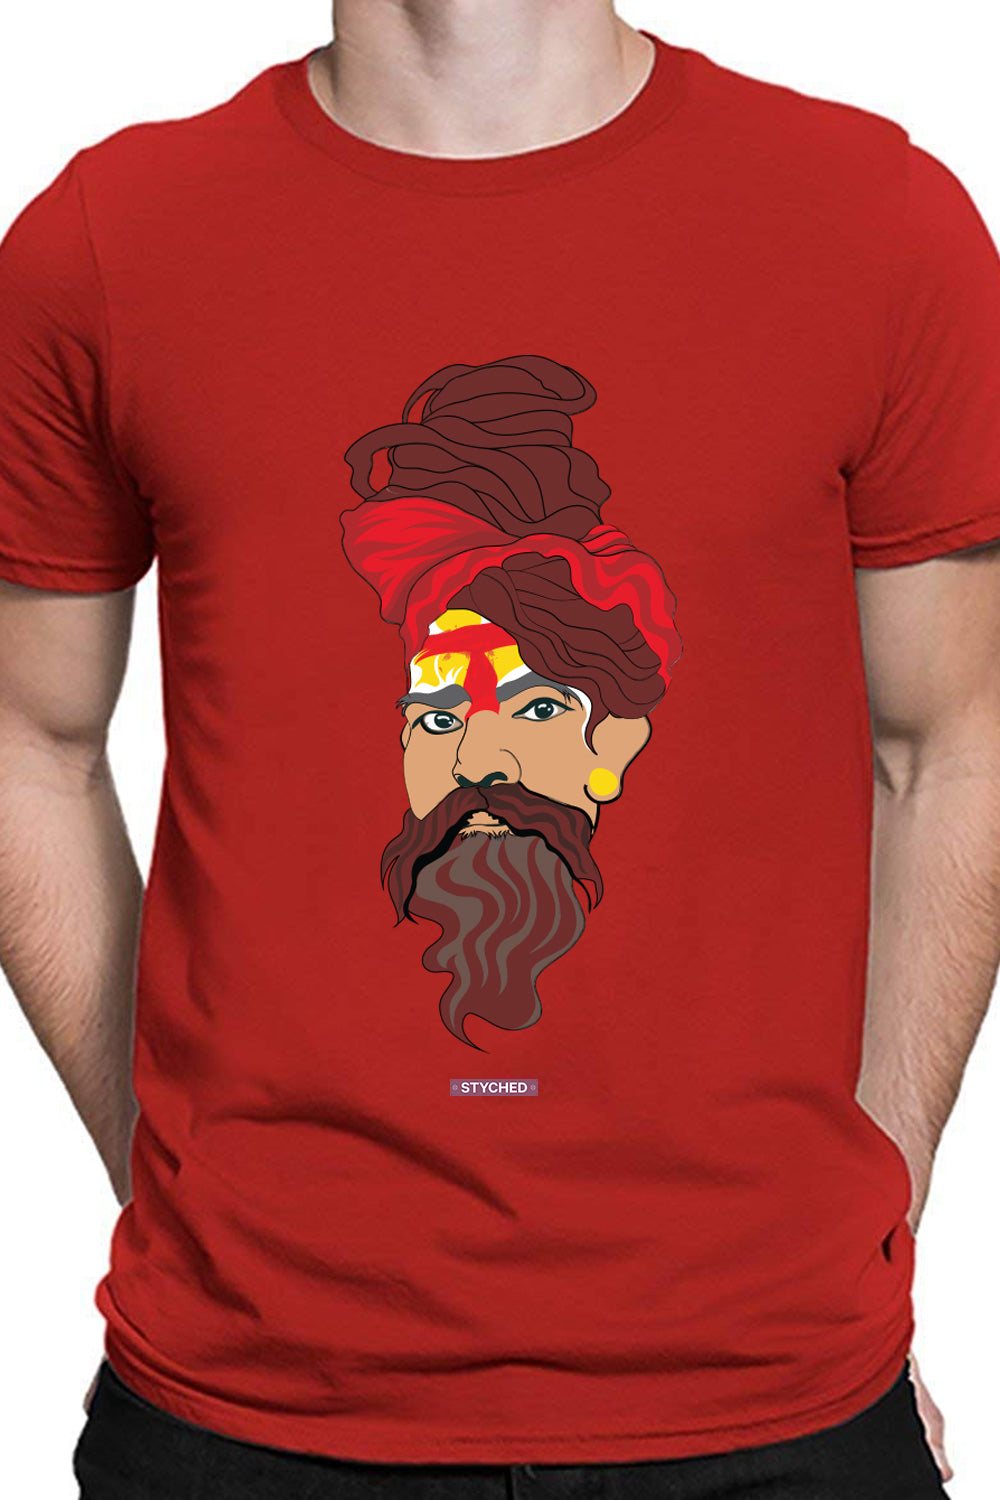 Sadhu baba - Quirky Graphic T-Shirt Red Color